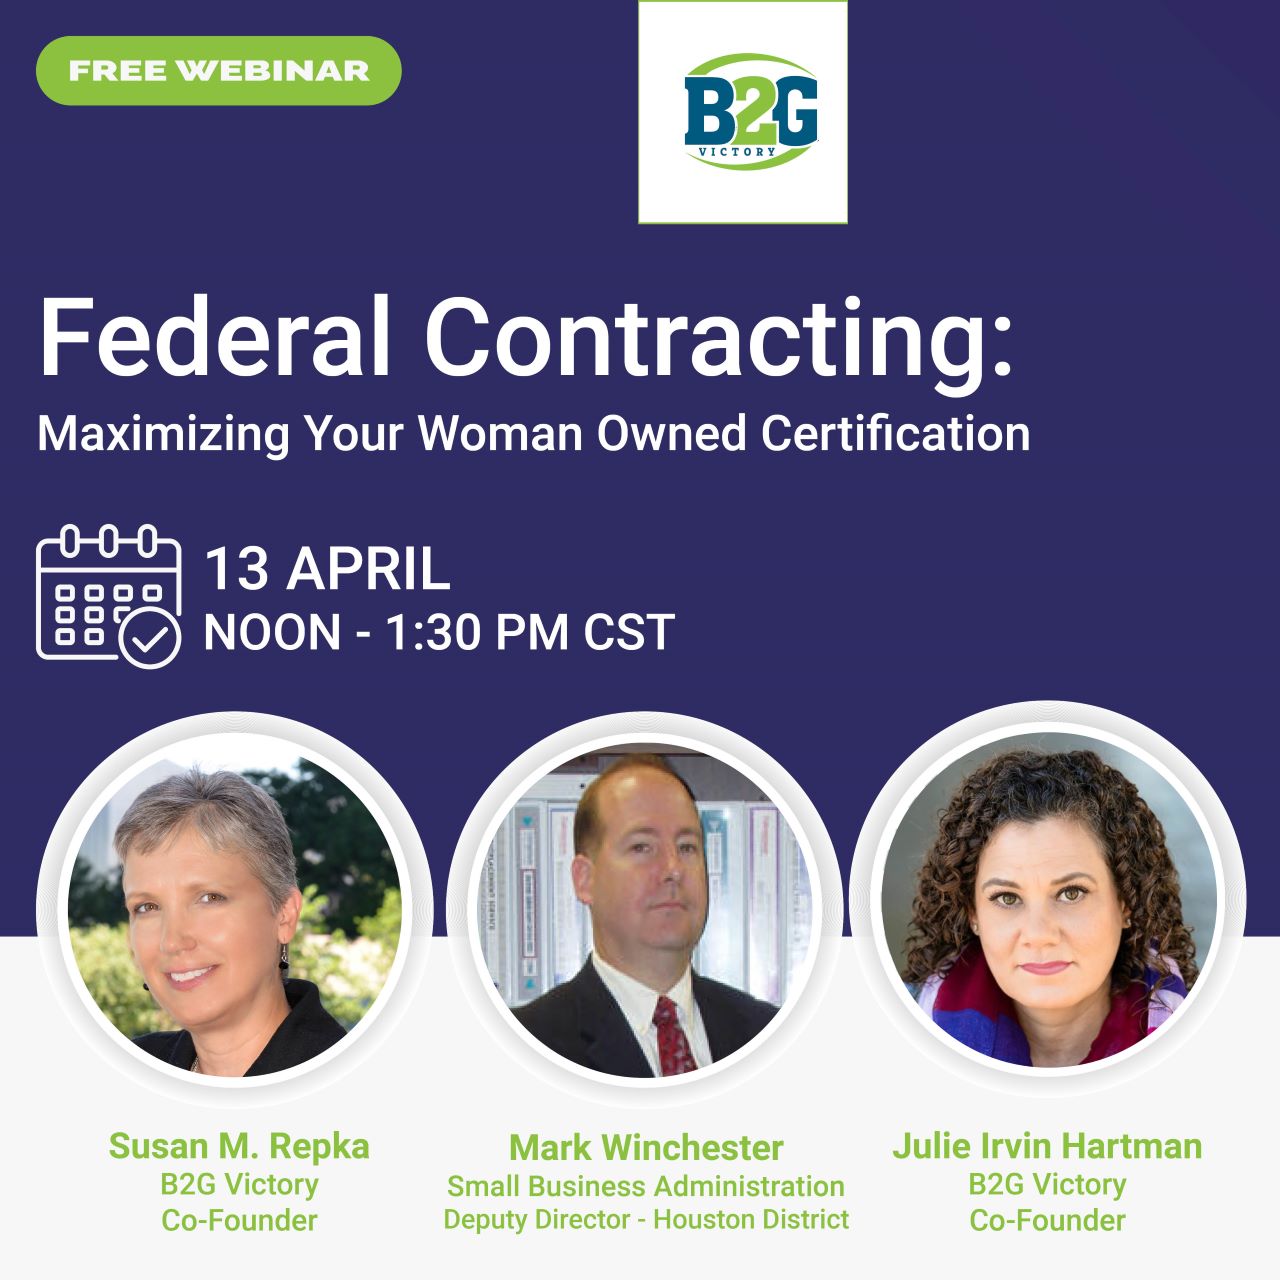 Federal Contracting: Maximize Your Women-Owned Business Certification